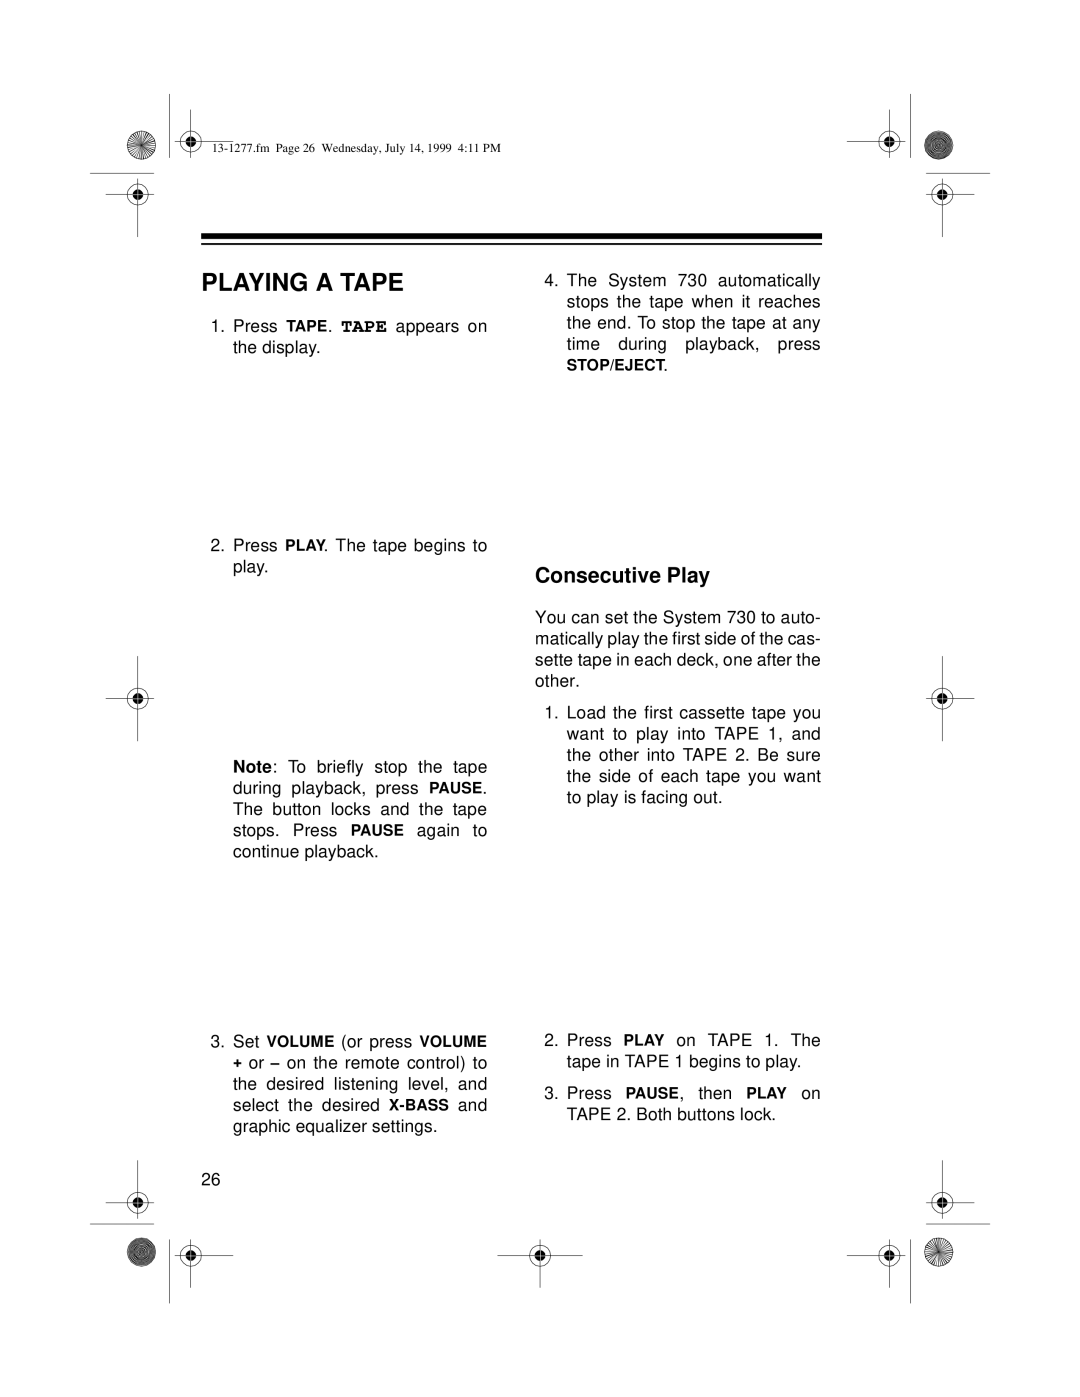 Optimus SYSTEM 730 owner manual Playing A Tape, Consecutive Play 